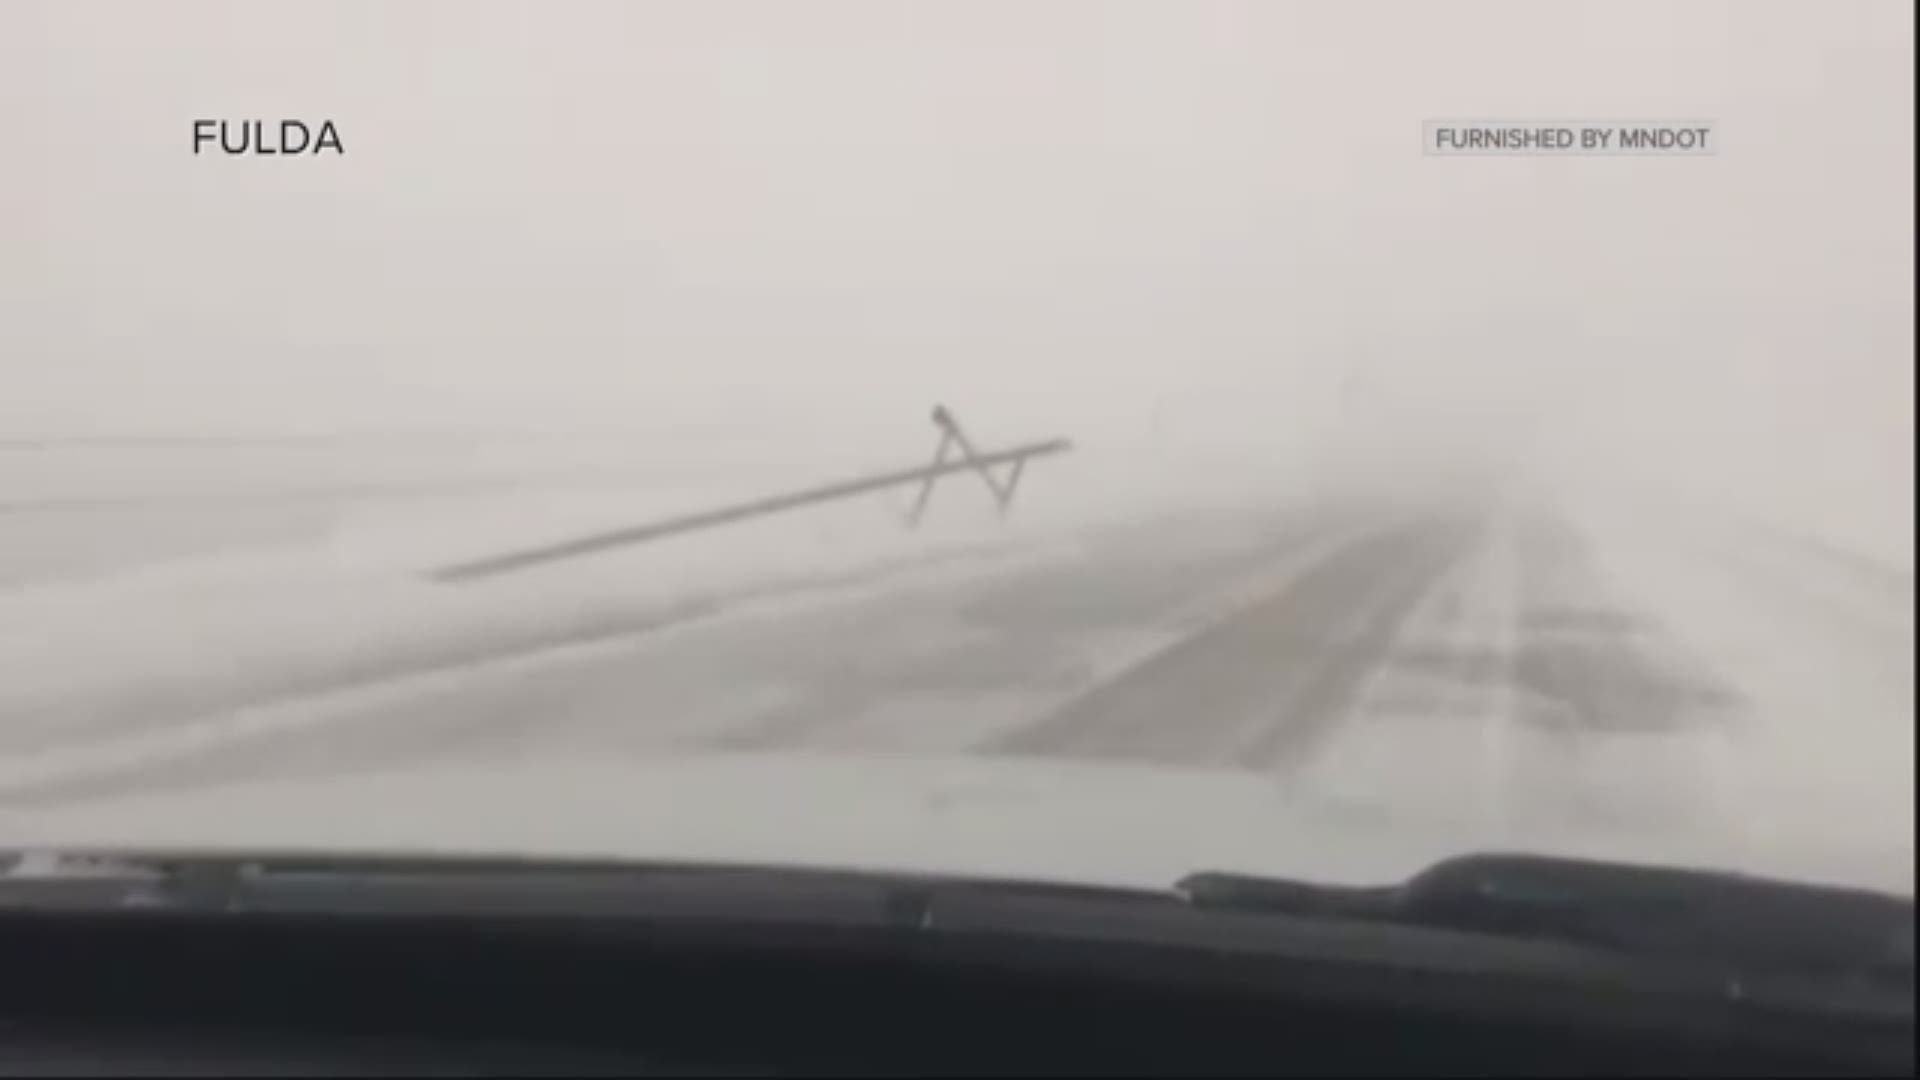 MnDOT tweeted video showing power poles on the ground lining Highway 59.